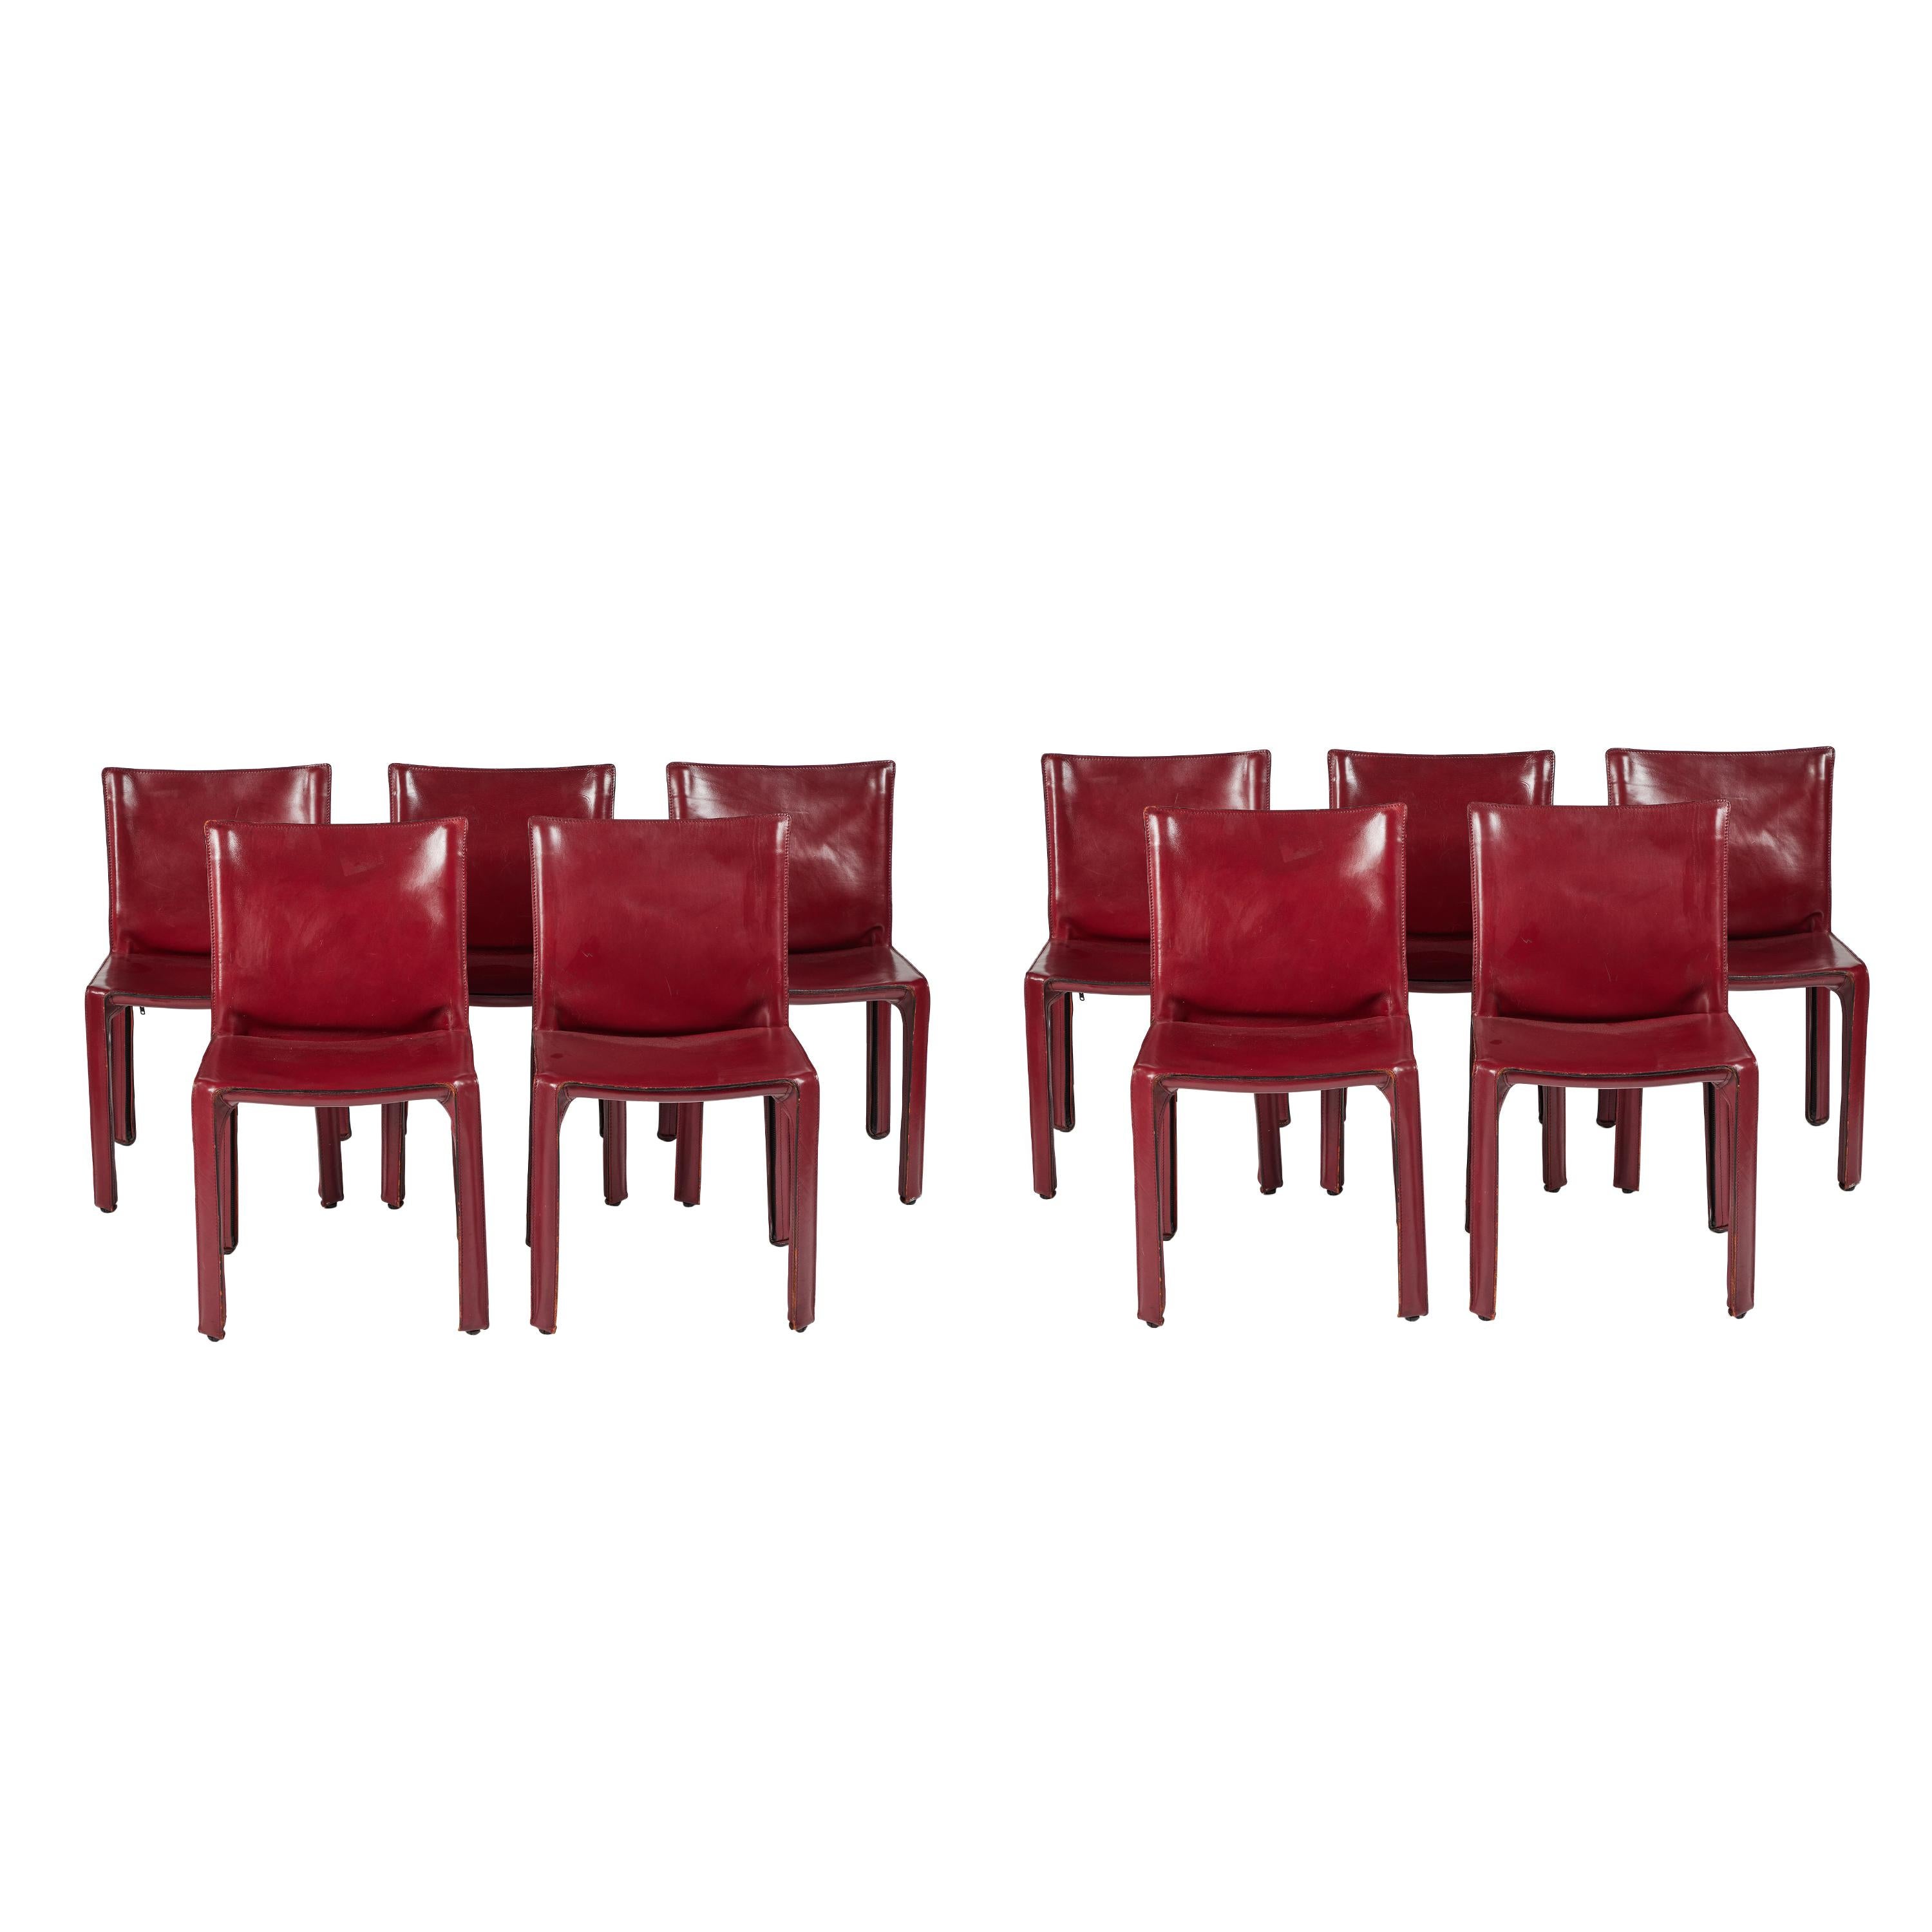 Set of 10 Burgundy Cab Dining Chairs by Mario Bellini for Cassina, 1977